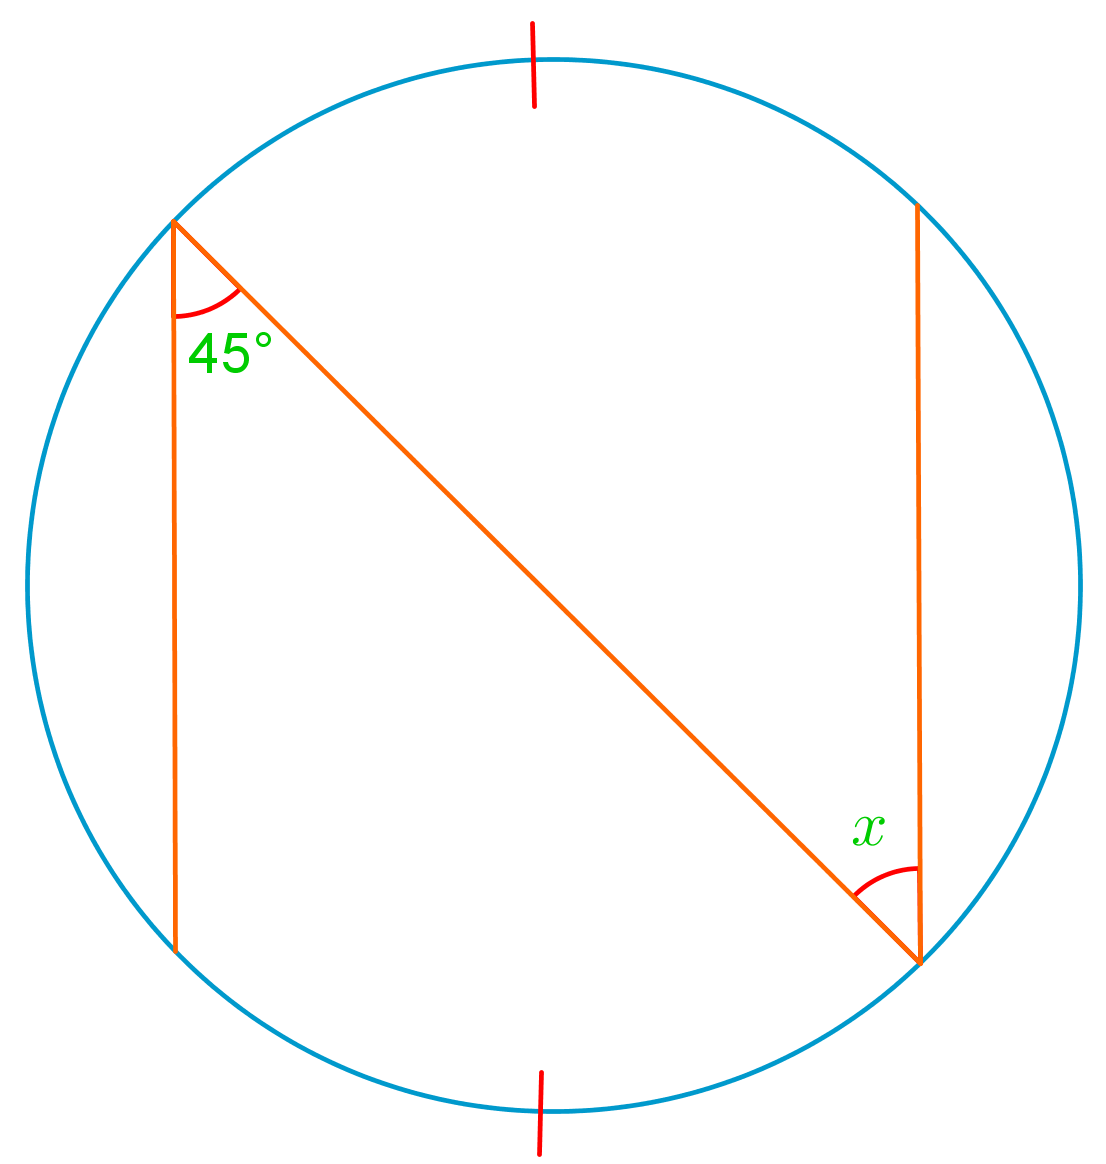 Inscribed angles and arc lengths